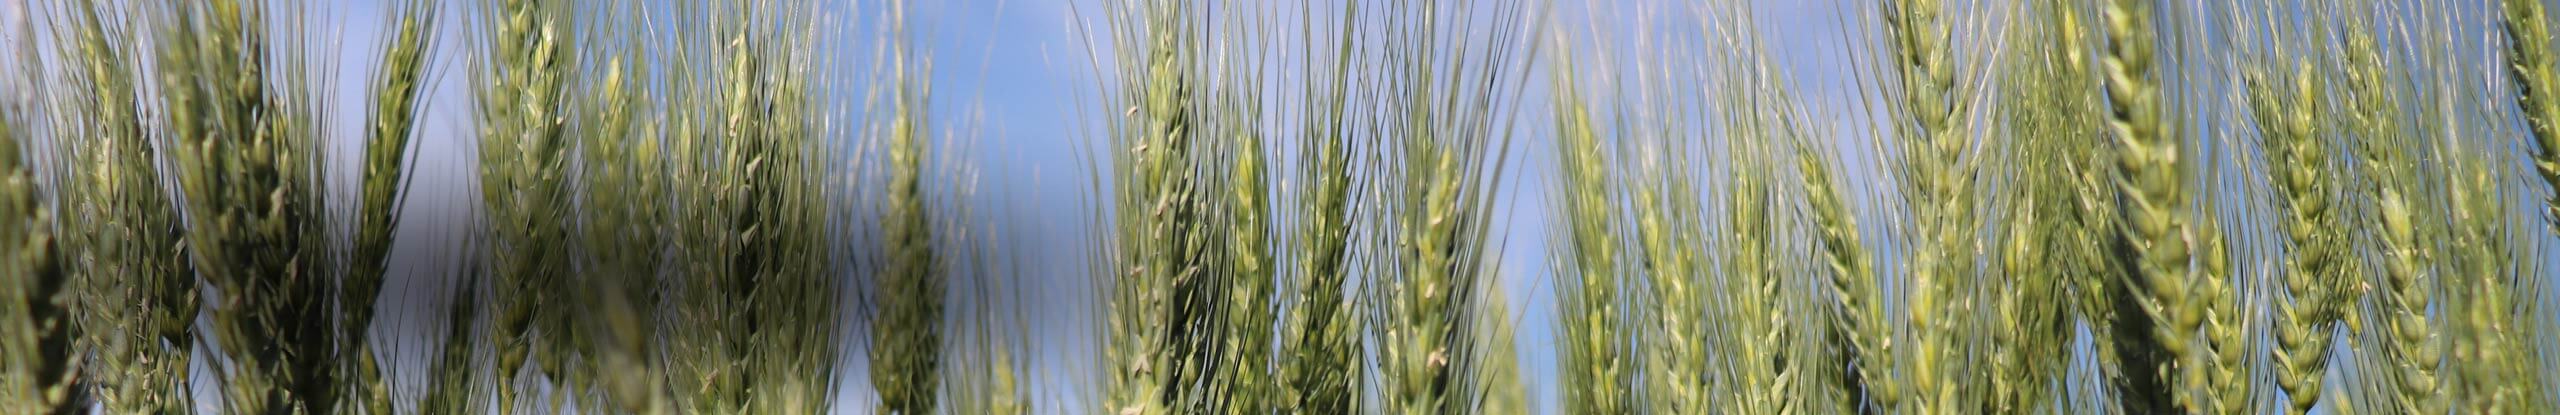 Canadian wheat alliance: standing strong: maximizing yield potential by optimizing stem strength and biomass partitioning